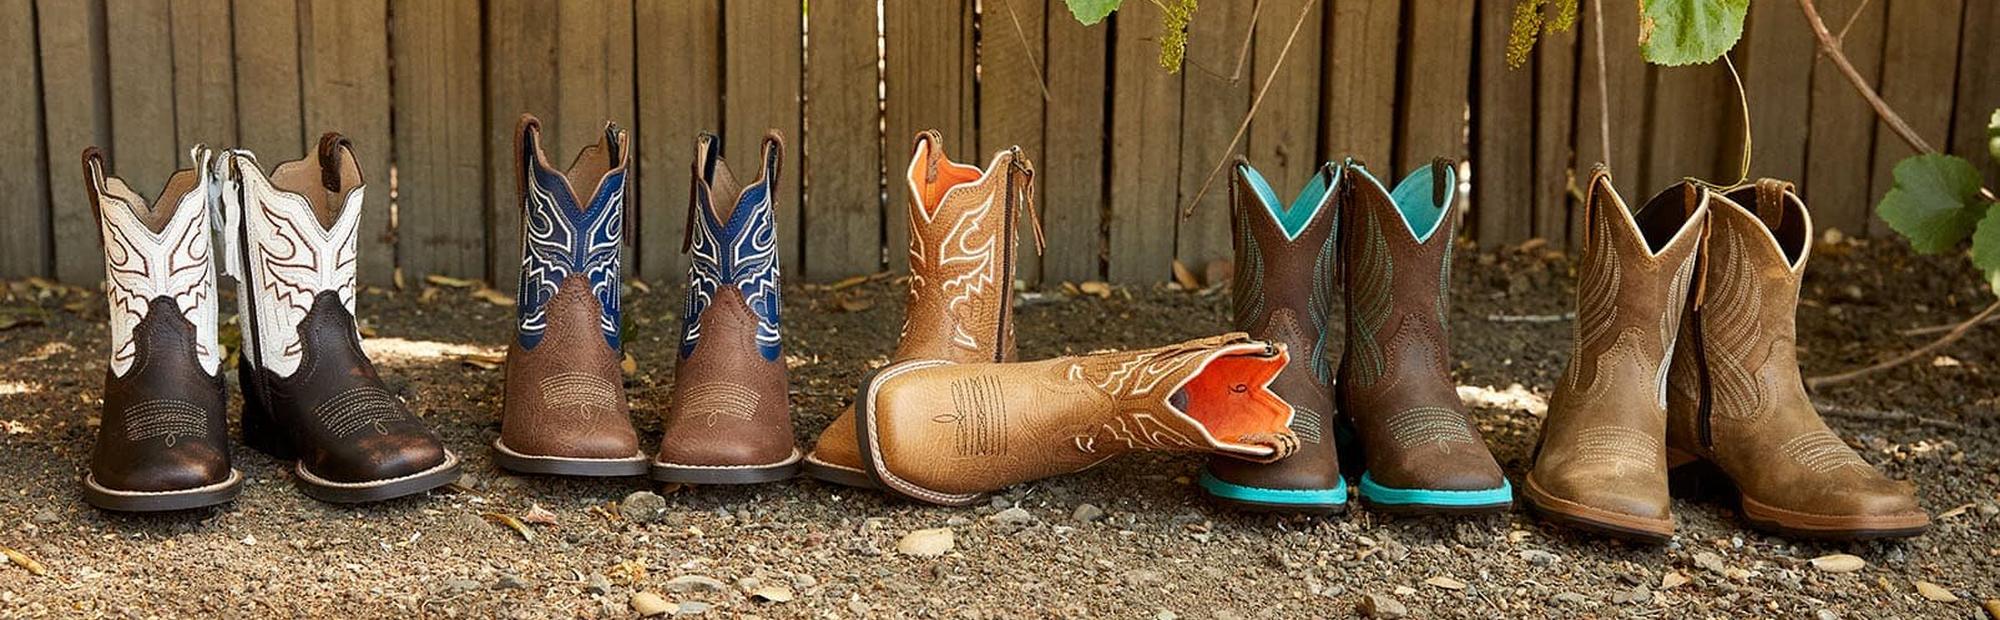 The Best Kids Cowboy Boots for Back-to-School